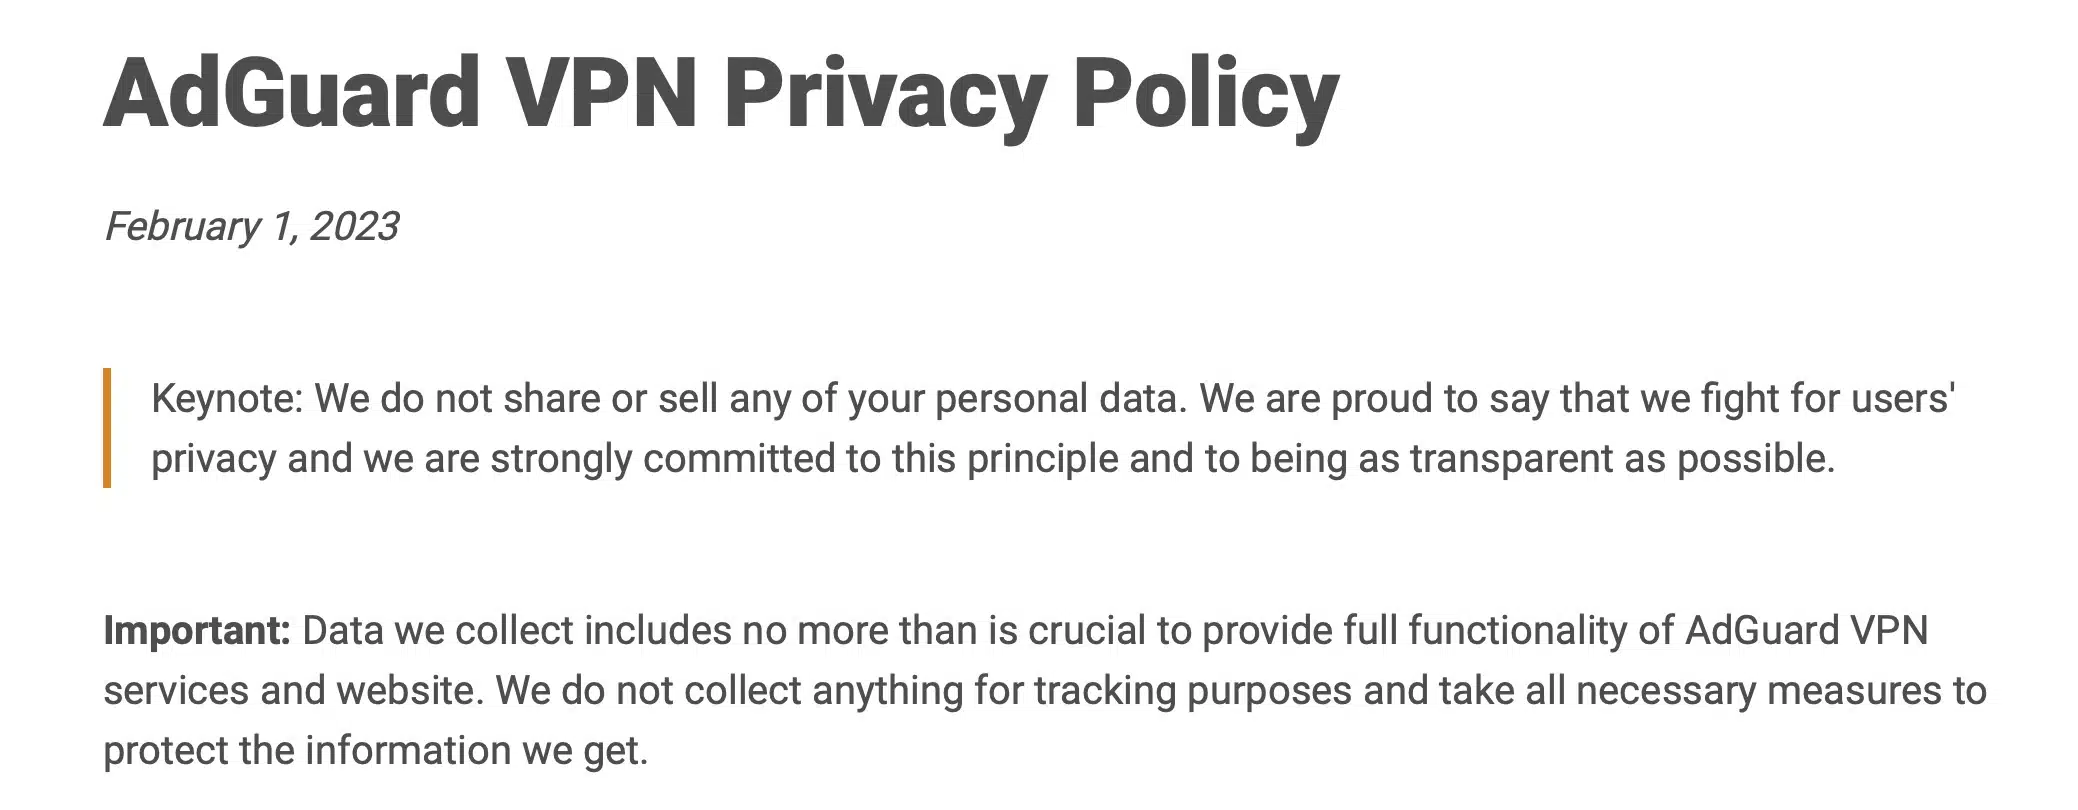 AdGuard_VPN - Privacy Policy 1